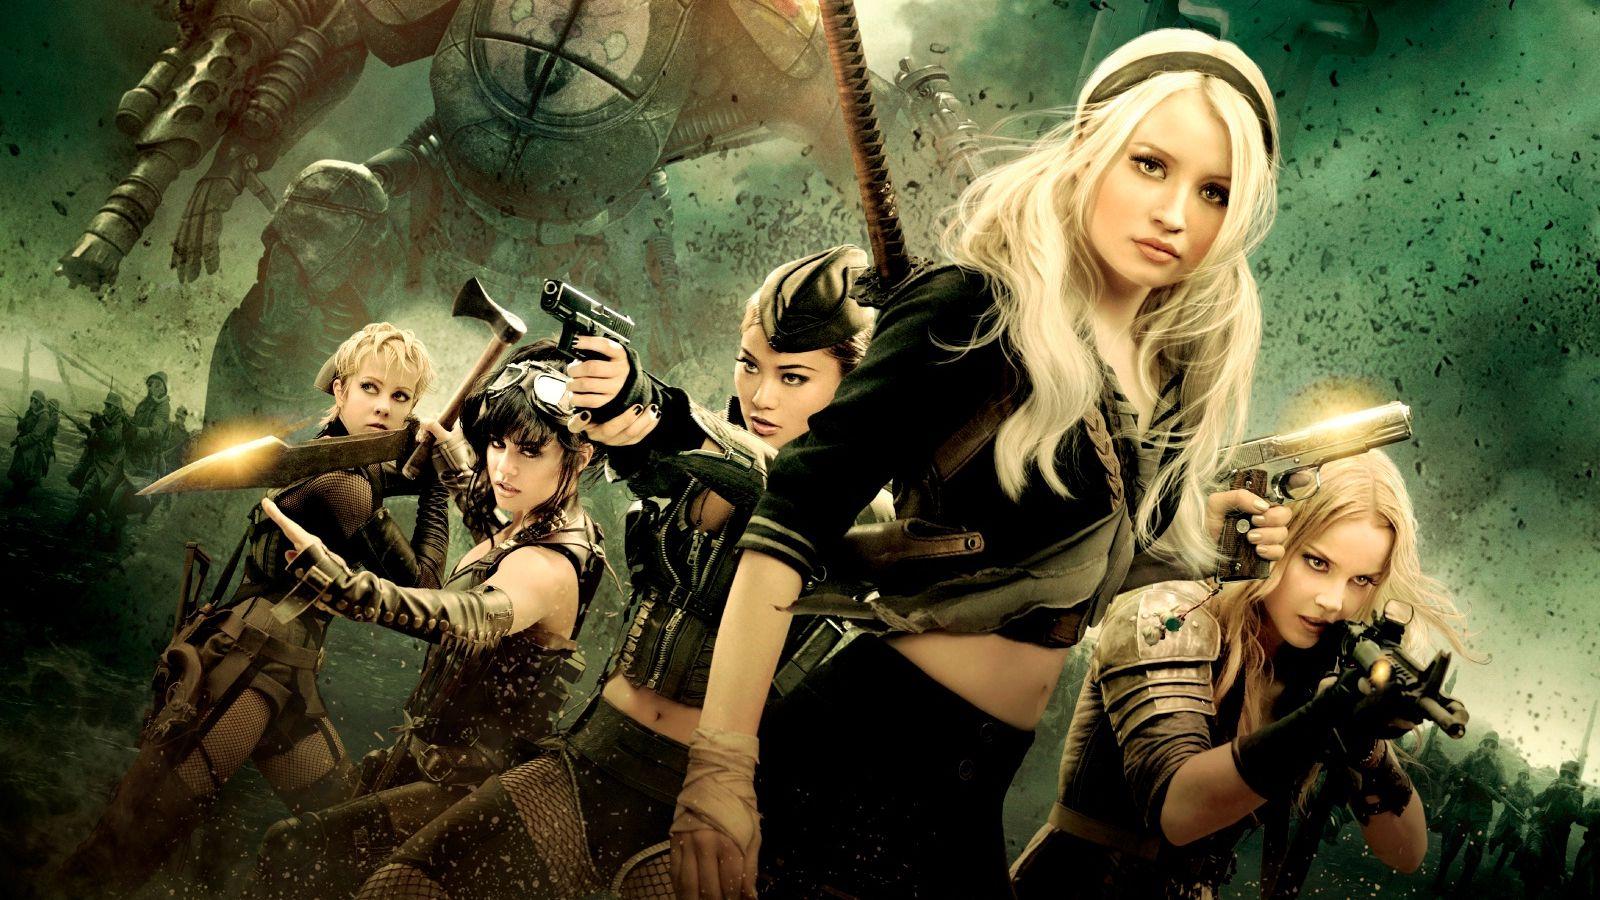 The cast of Sucker Punch in the movie's main poster. They stand in the fantasy world with weapons drawn.